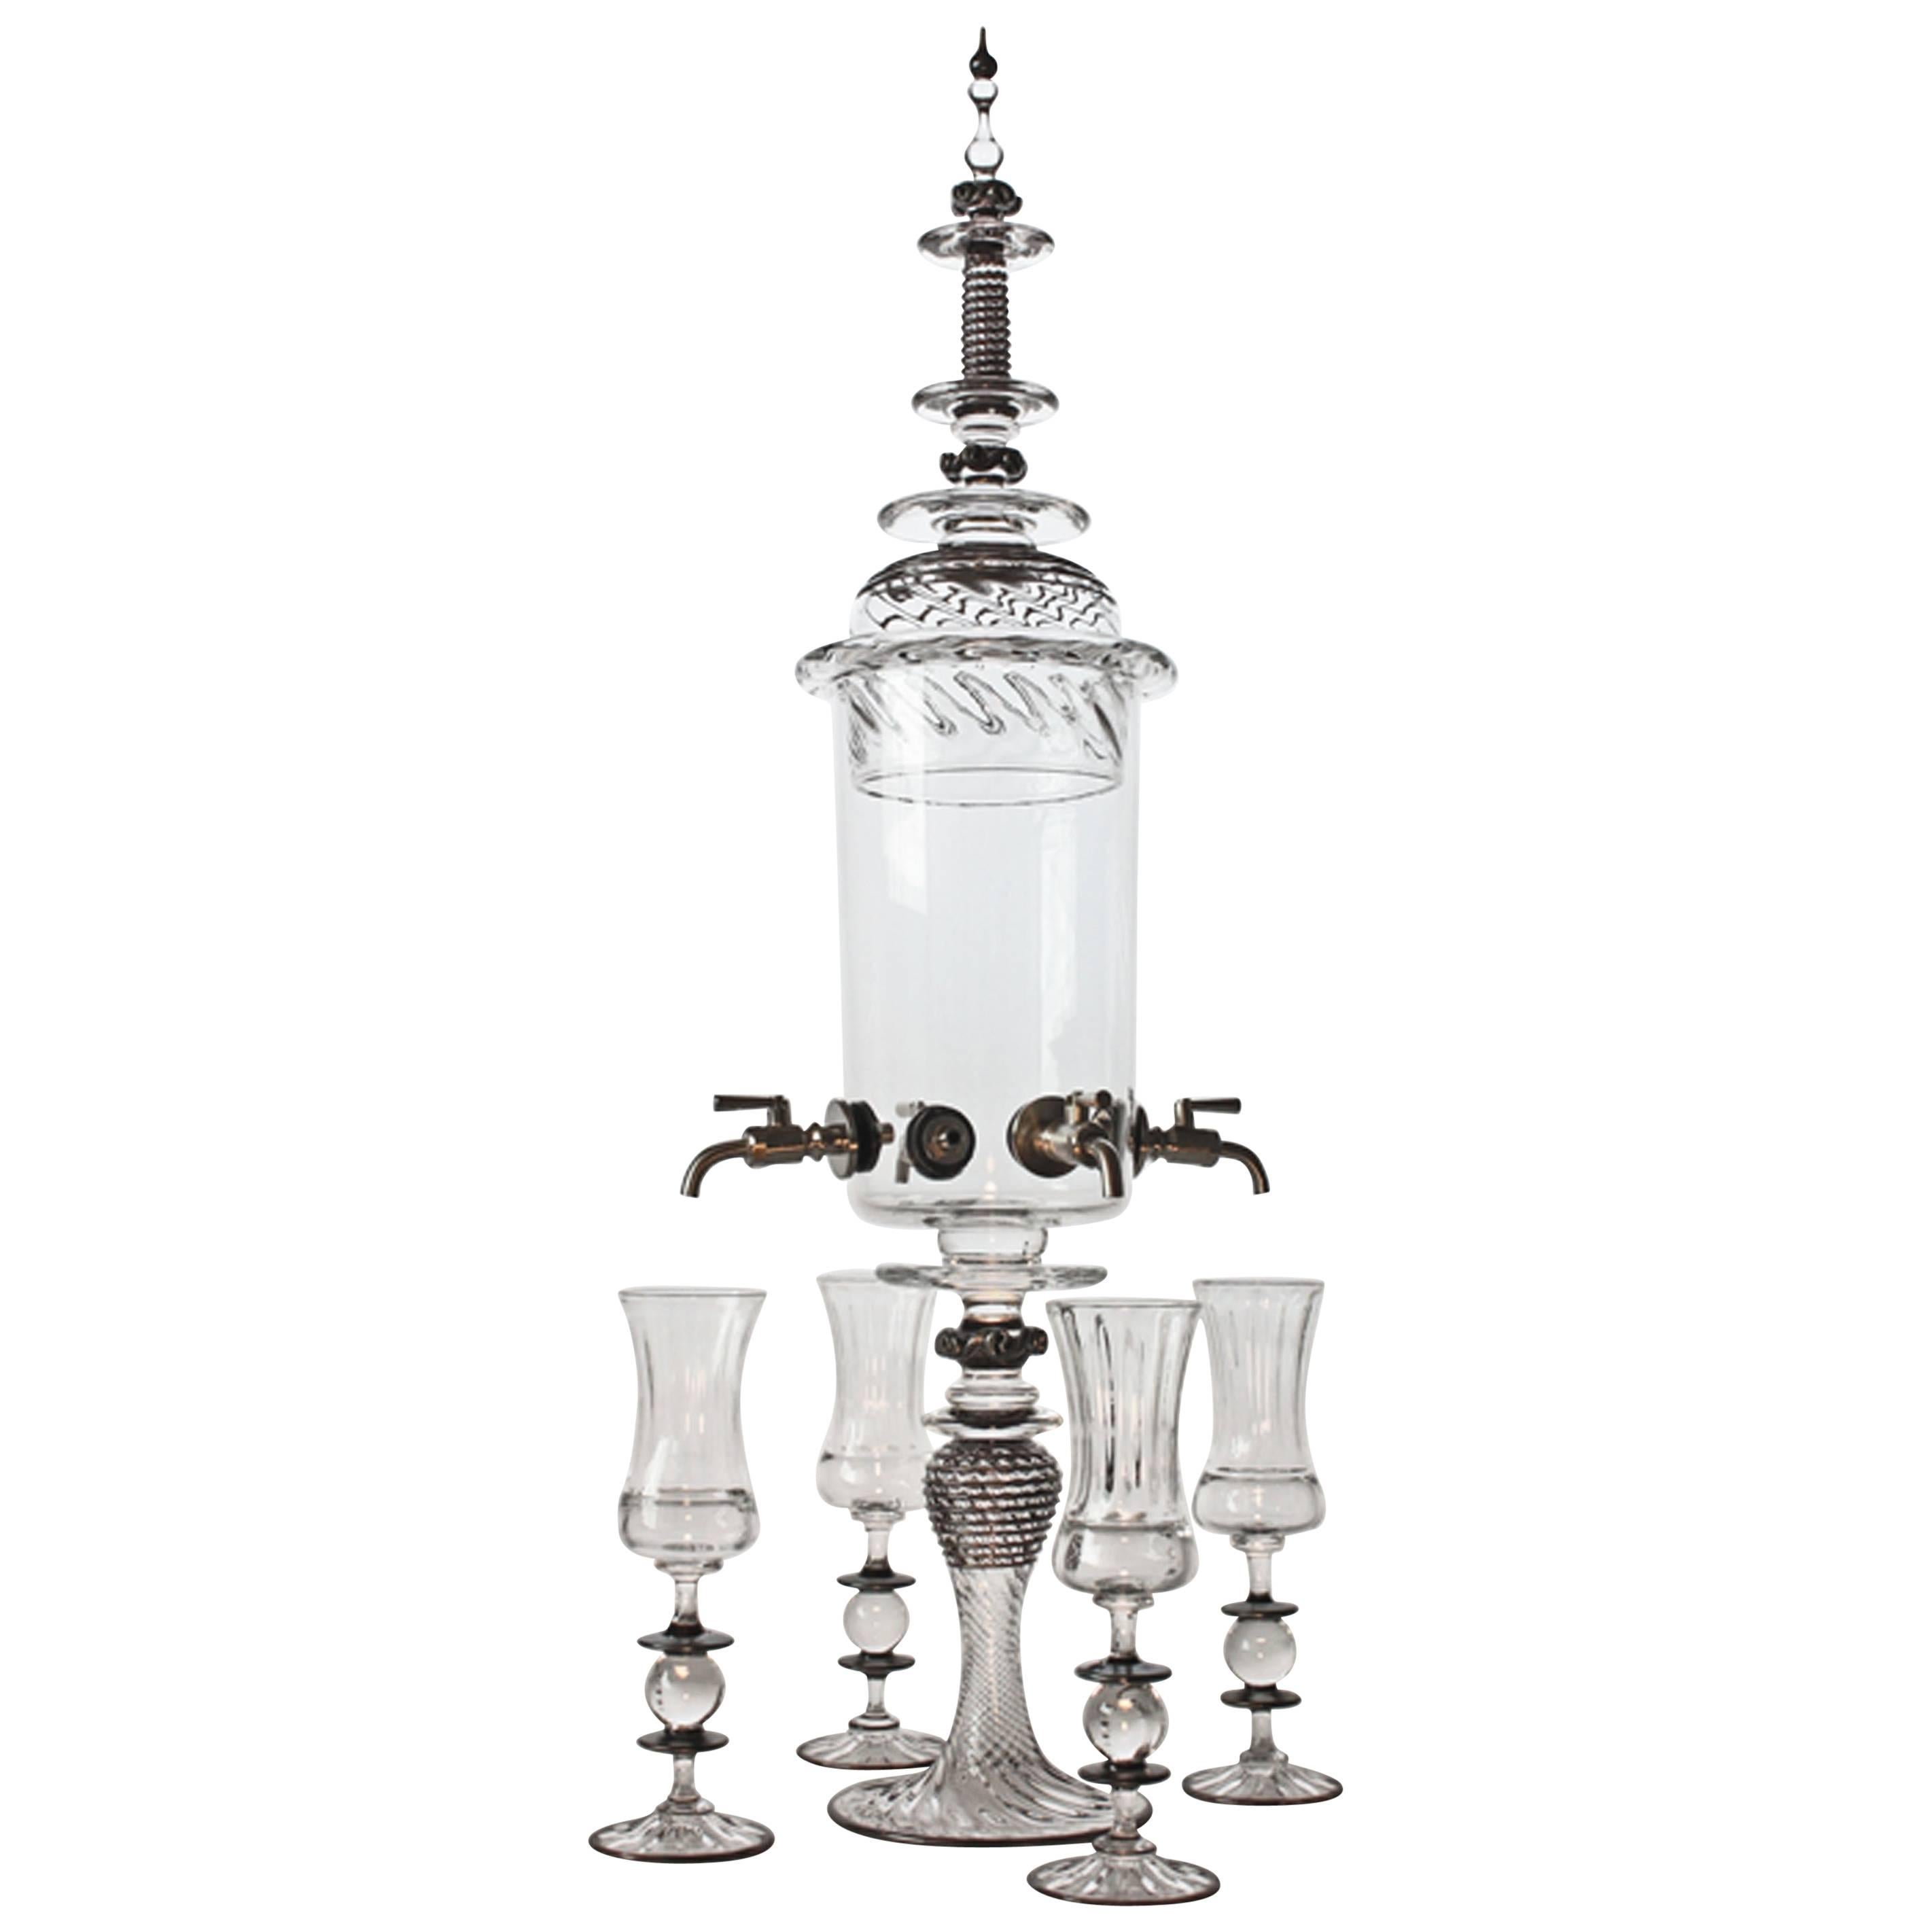 Contemporary Absinthe Fountain with Black Details and Four Spigots Glass Set